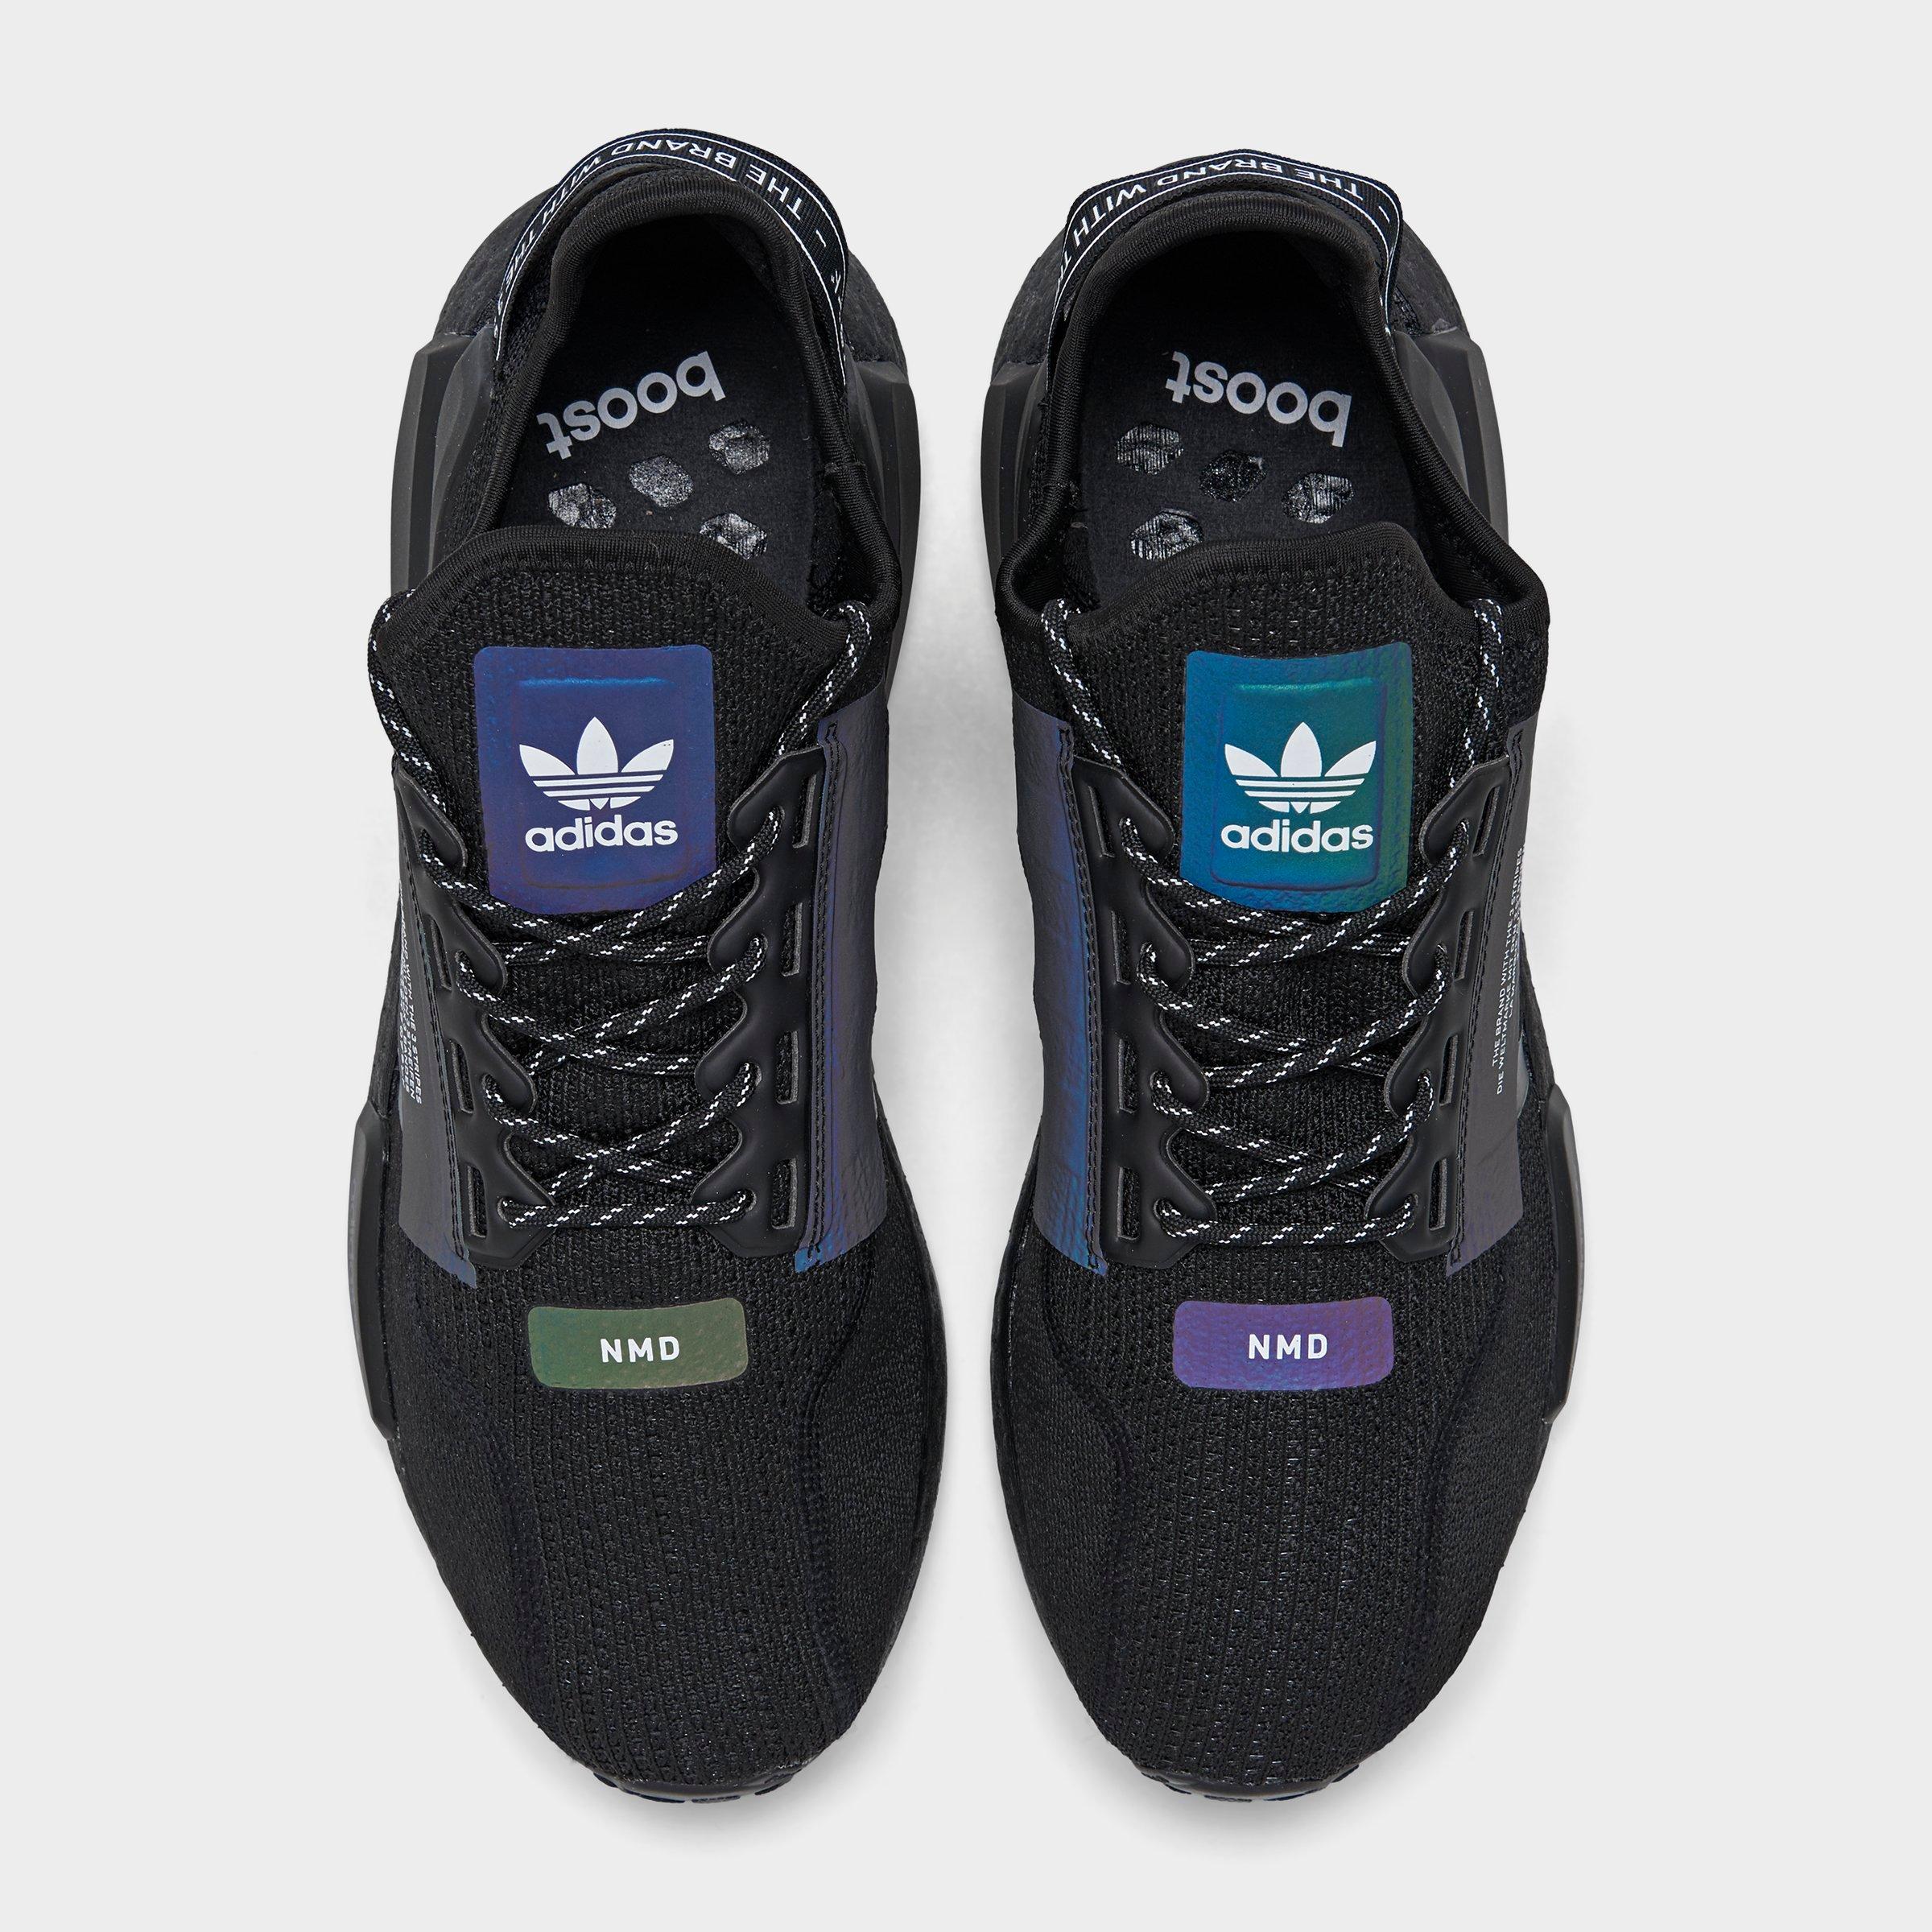 adidas nmd r1 insole off 62% icratingse